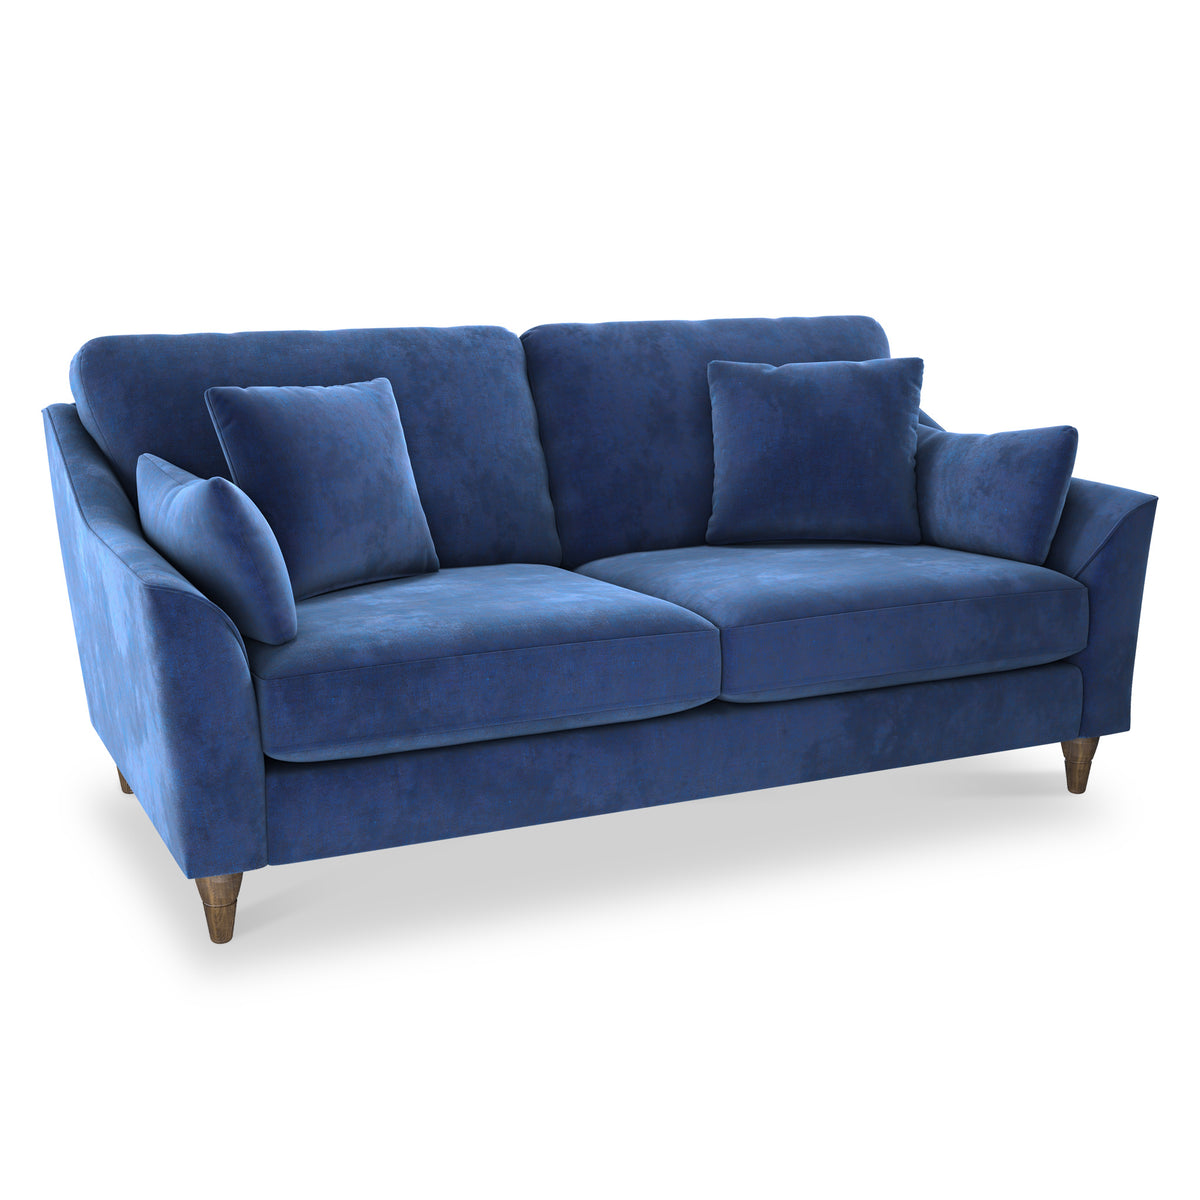 Charice Navy 2 Seater Sofa from Roseland Furniture